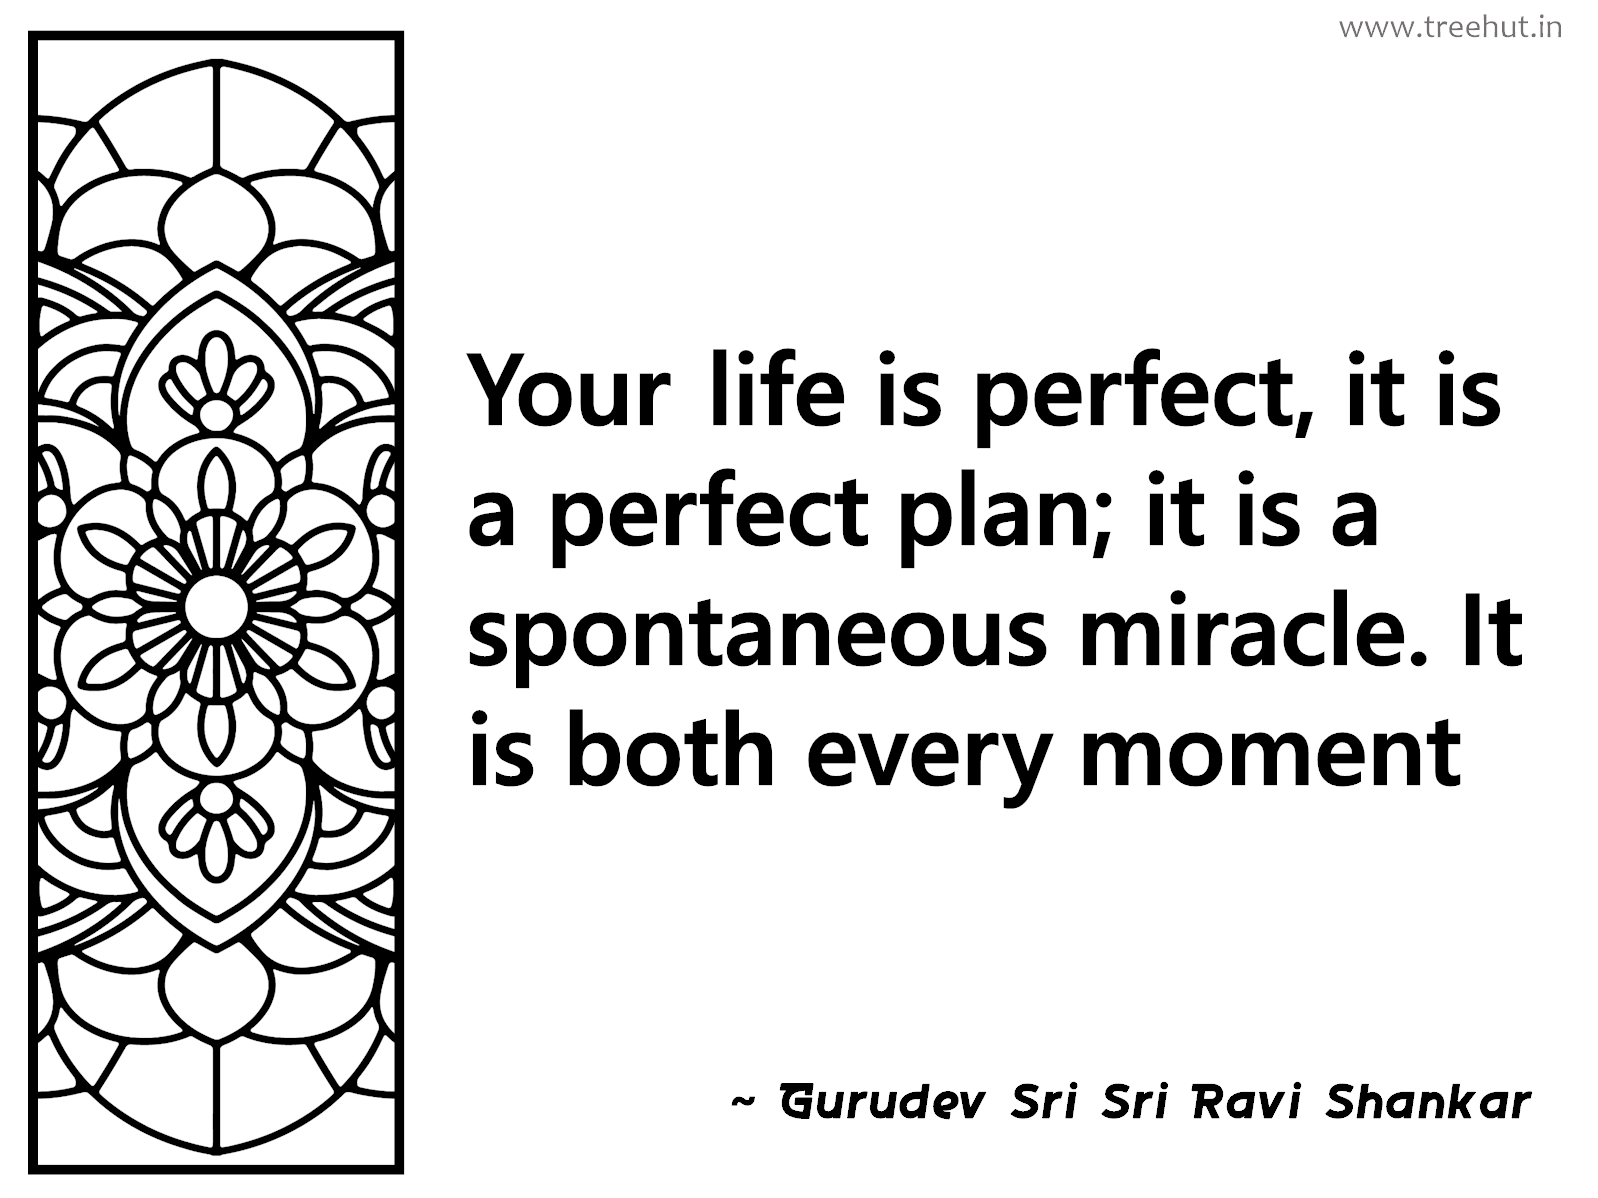 Your life is perfect, it is a perfect plan; it is a spontaneous miracle. It is both every moment Inspirational Quote by Gurudev Sri Sri Ravi Shankar, coloring pages